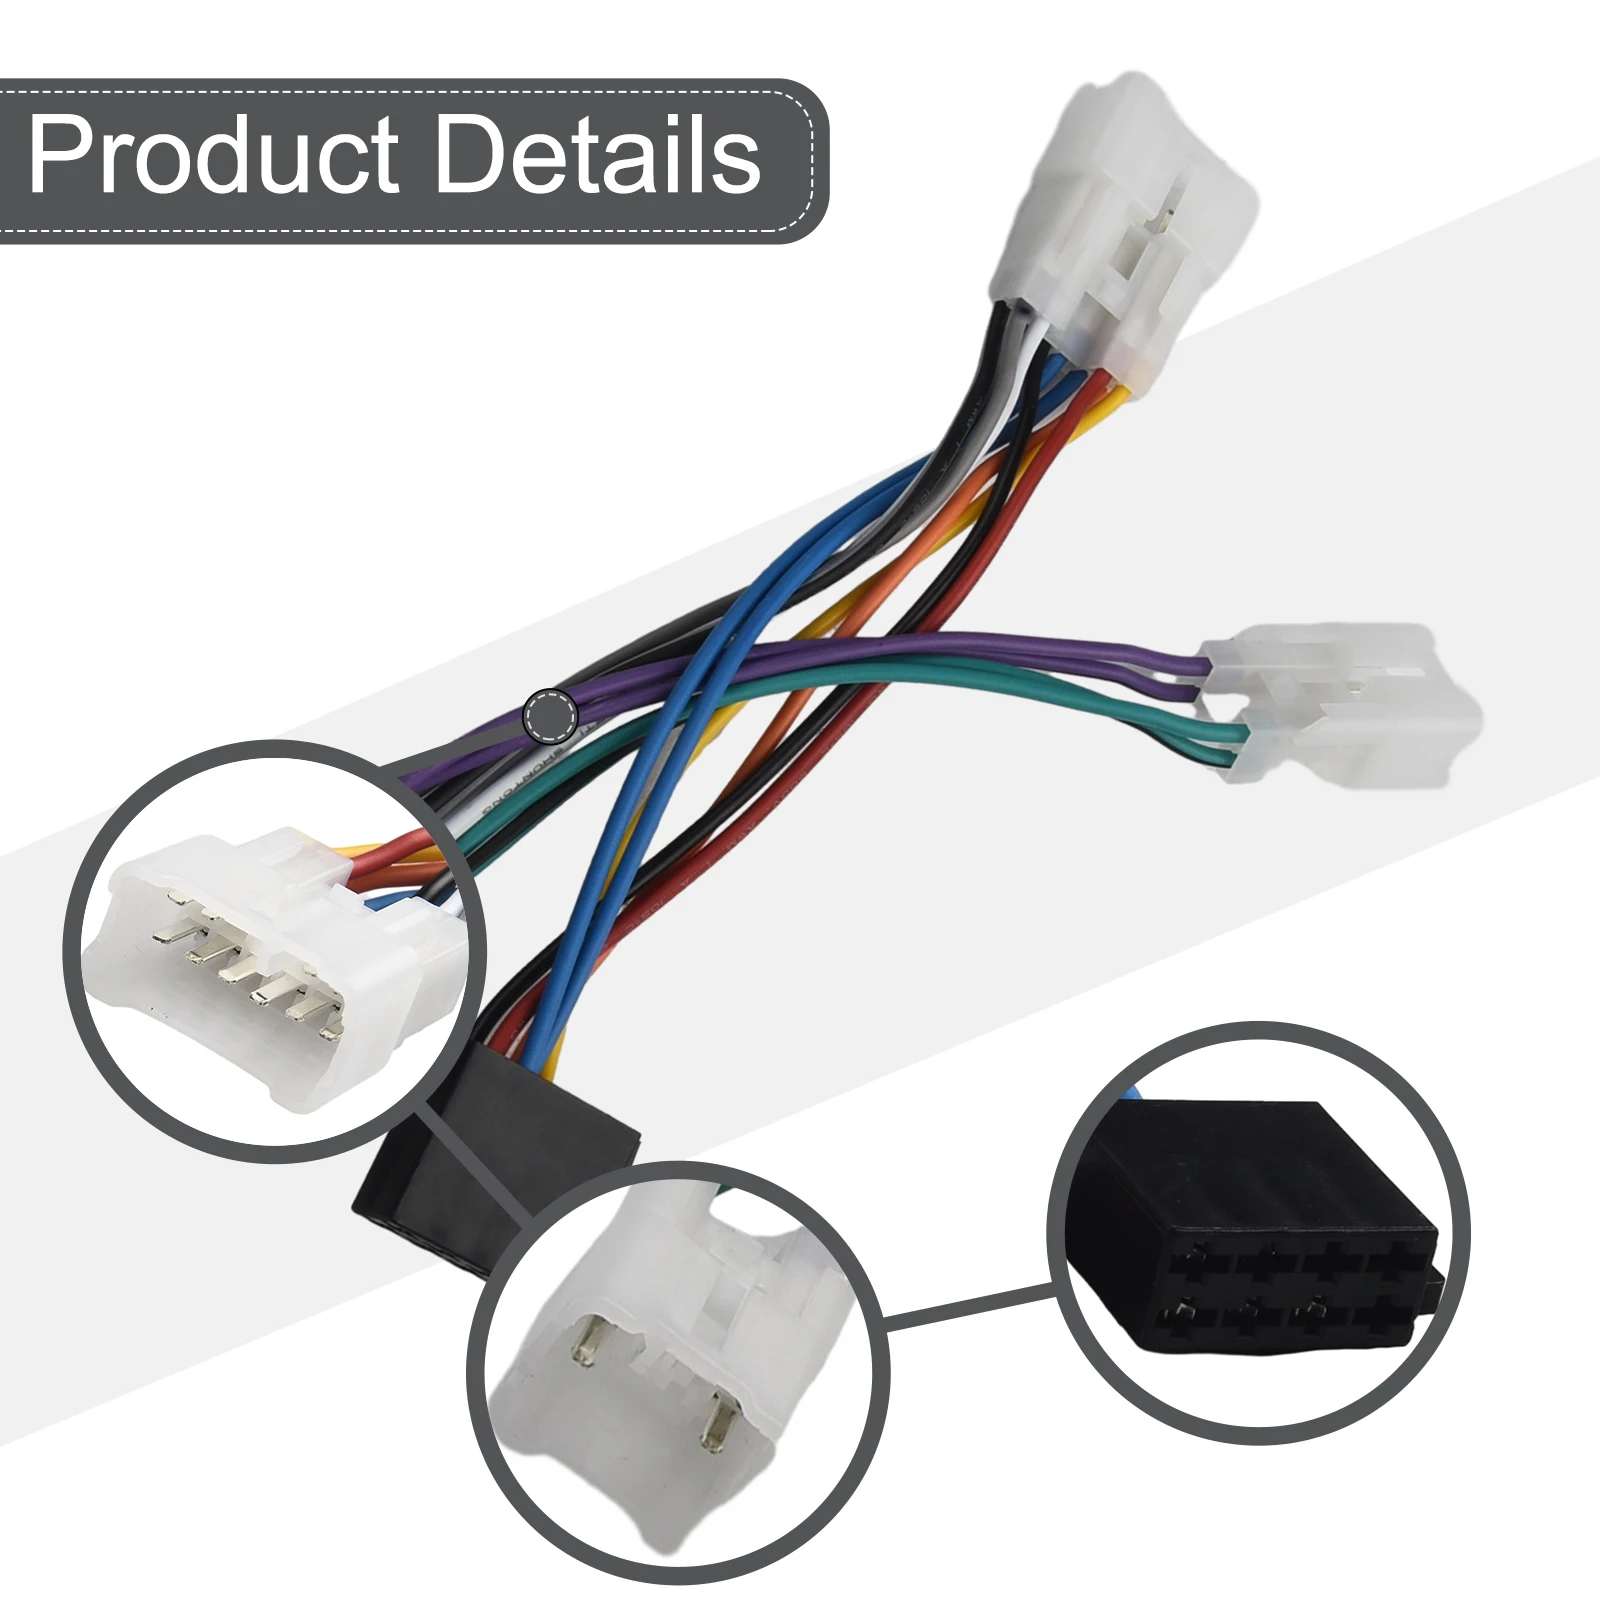 

Car ISO Radio Stereo Wiring Harness Cable Adapter Connector Plug For Toyota Harness Cable Adapter Connector Plug